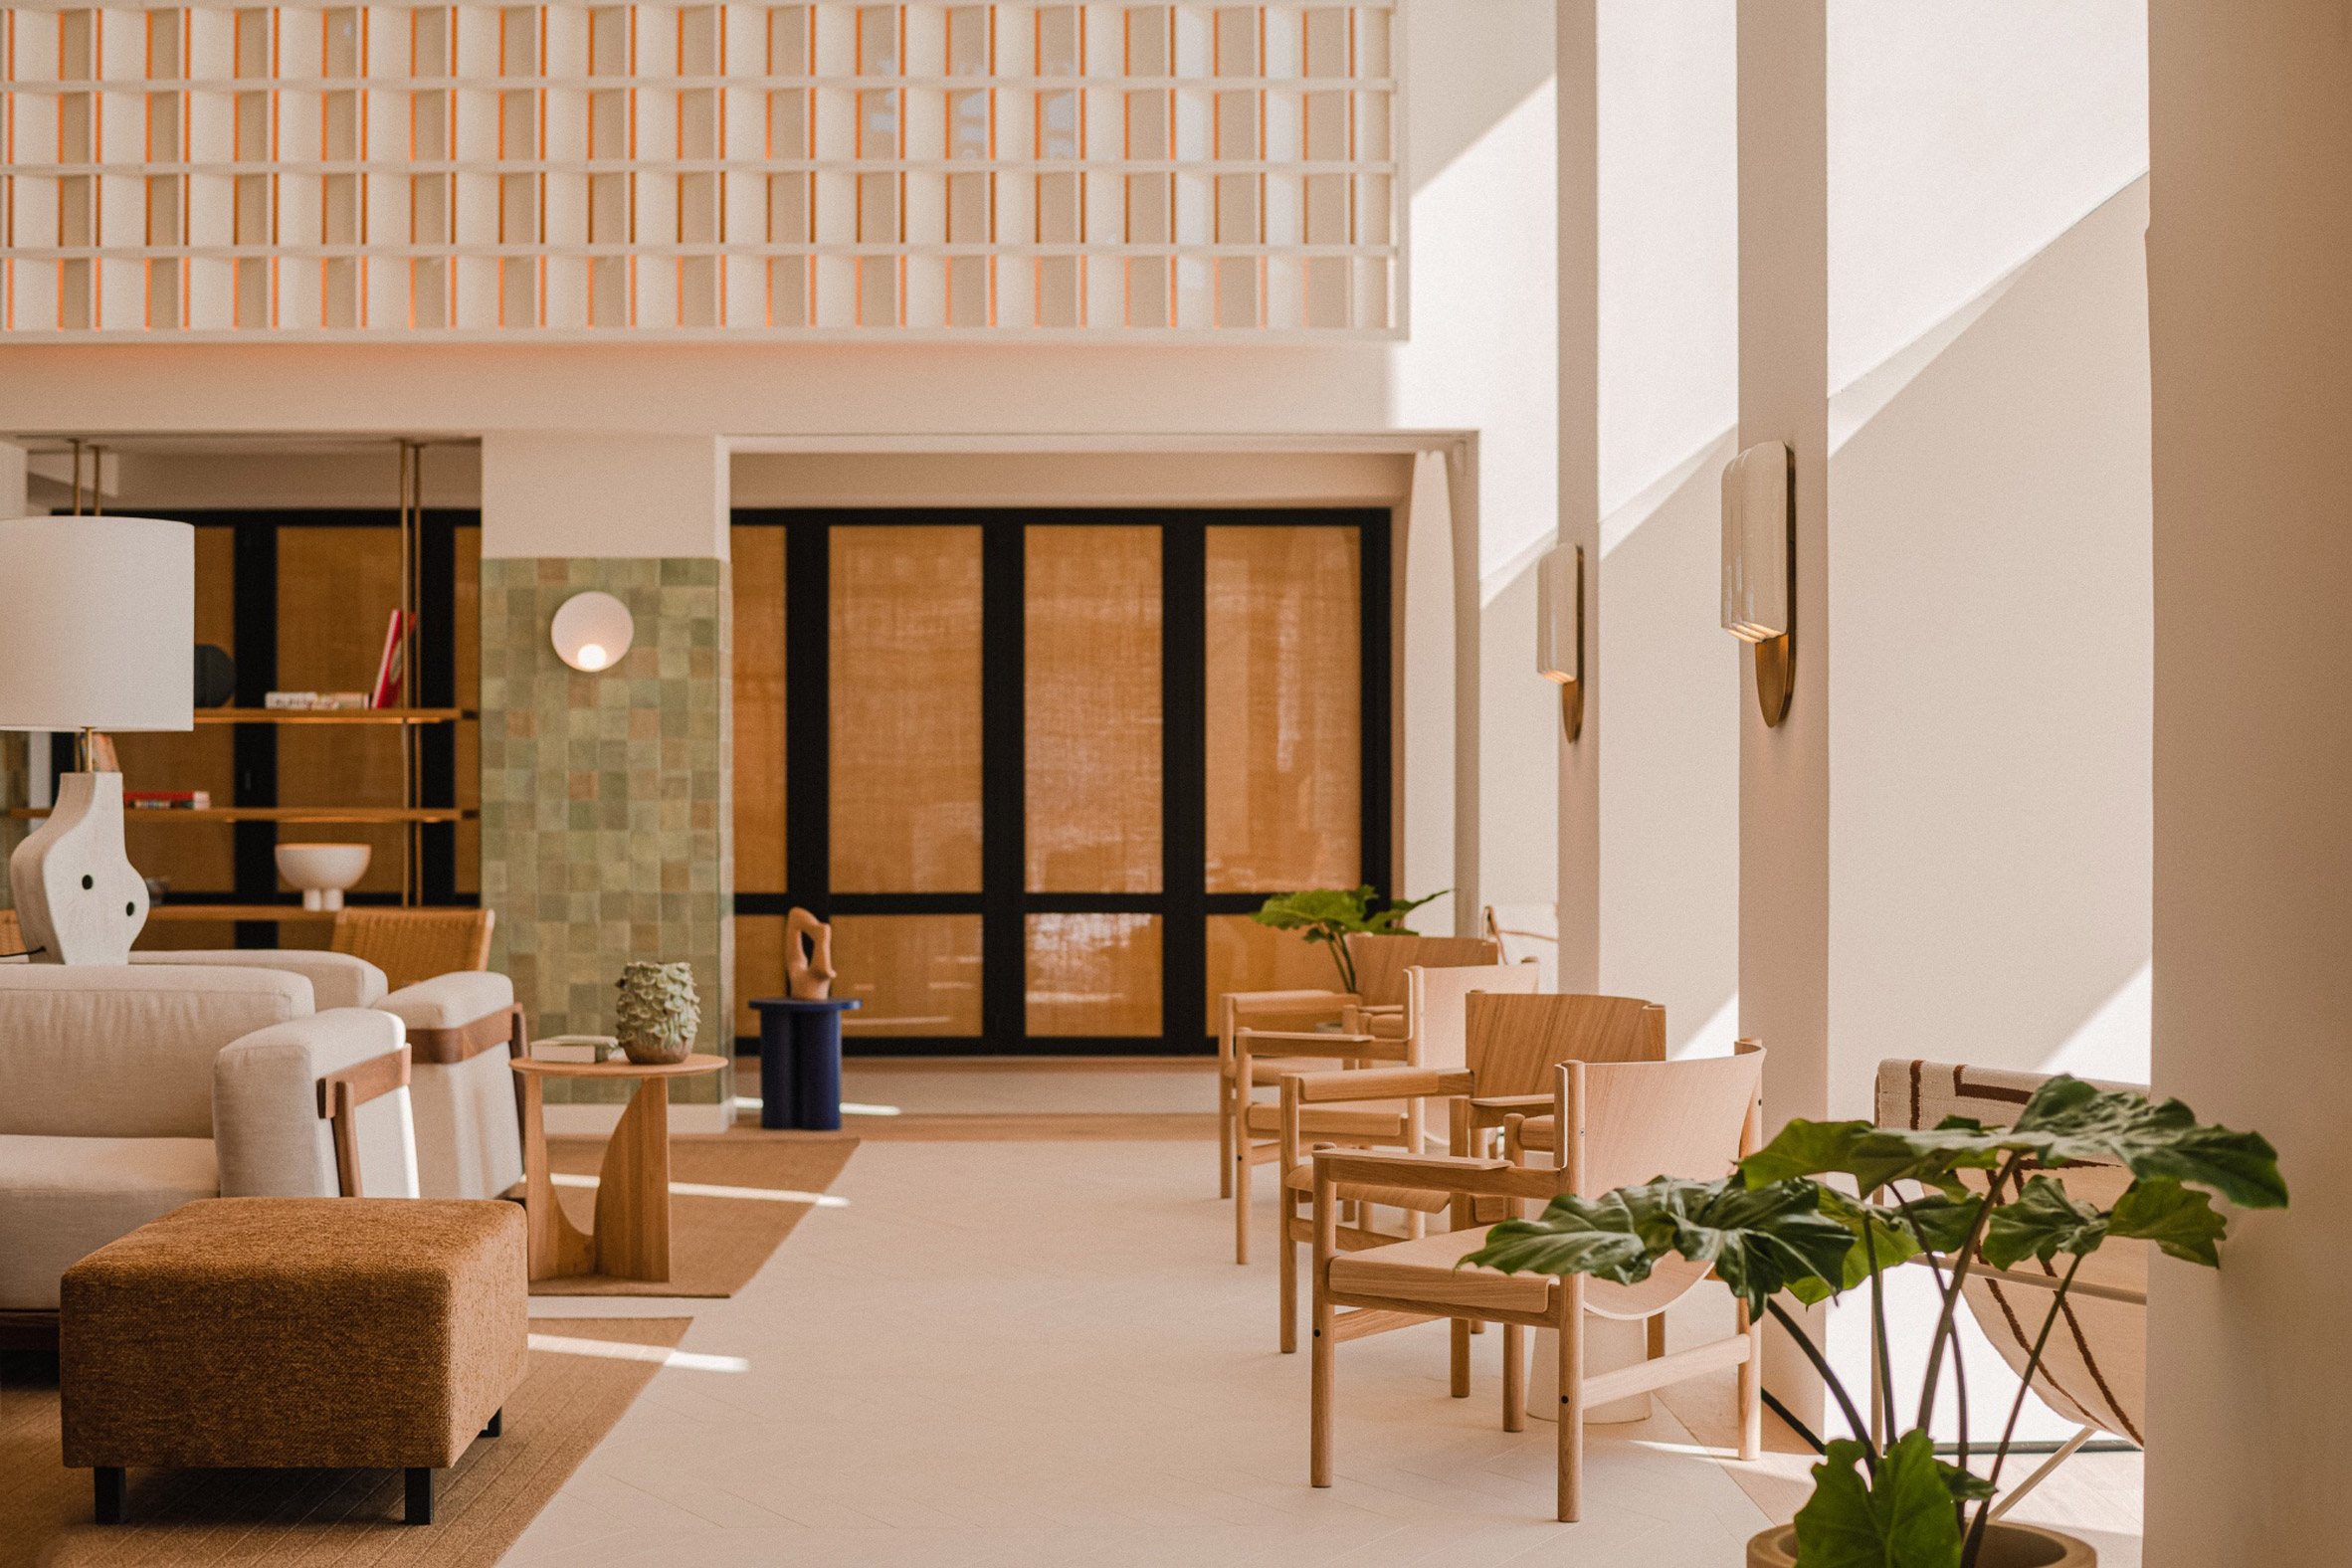 Lobby with arched windows in Aethos Ericeira